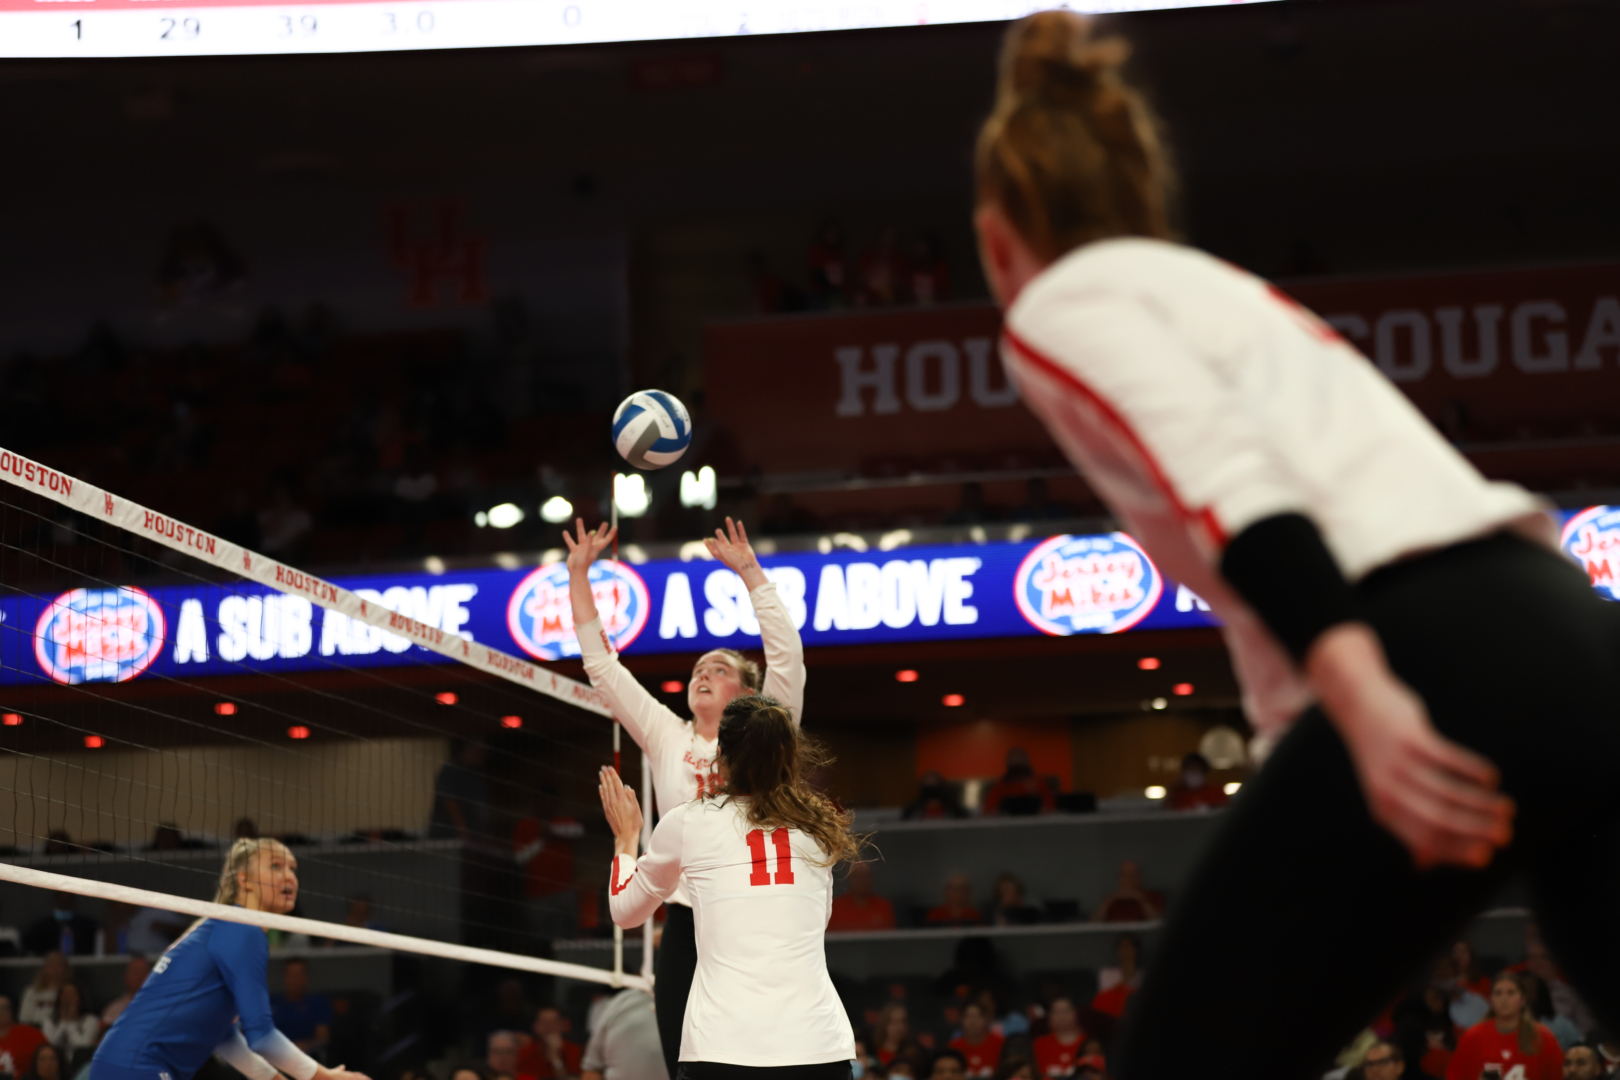 UH volleyball dropped its second match in AAC play on Friday night, falling 3-1 to SMU. | Esther Umoh/The Cougar